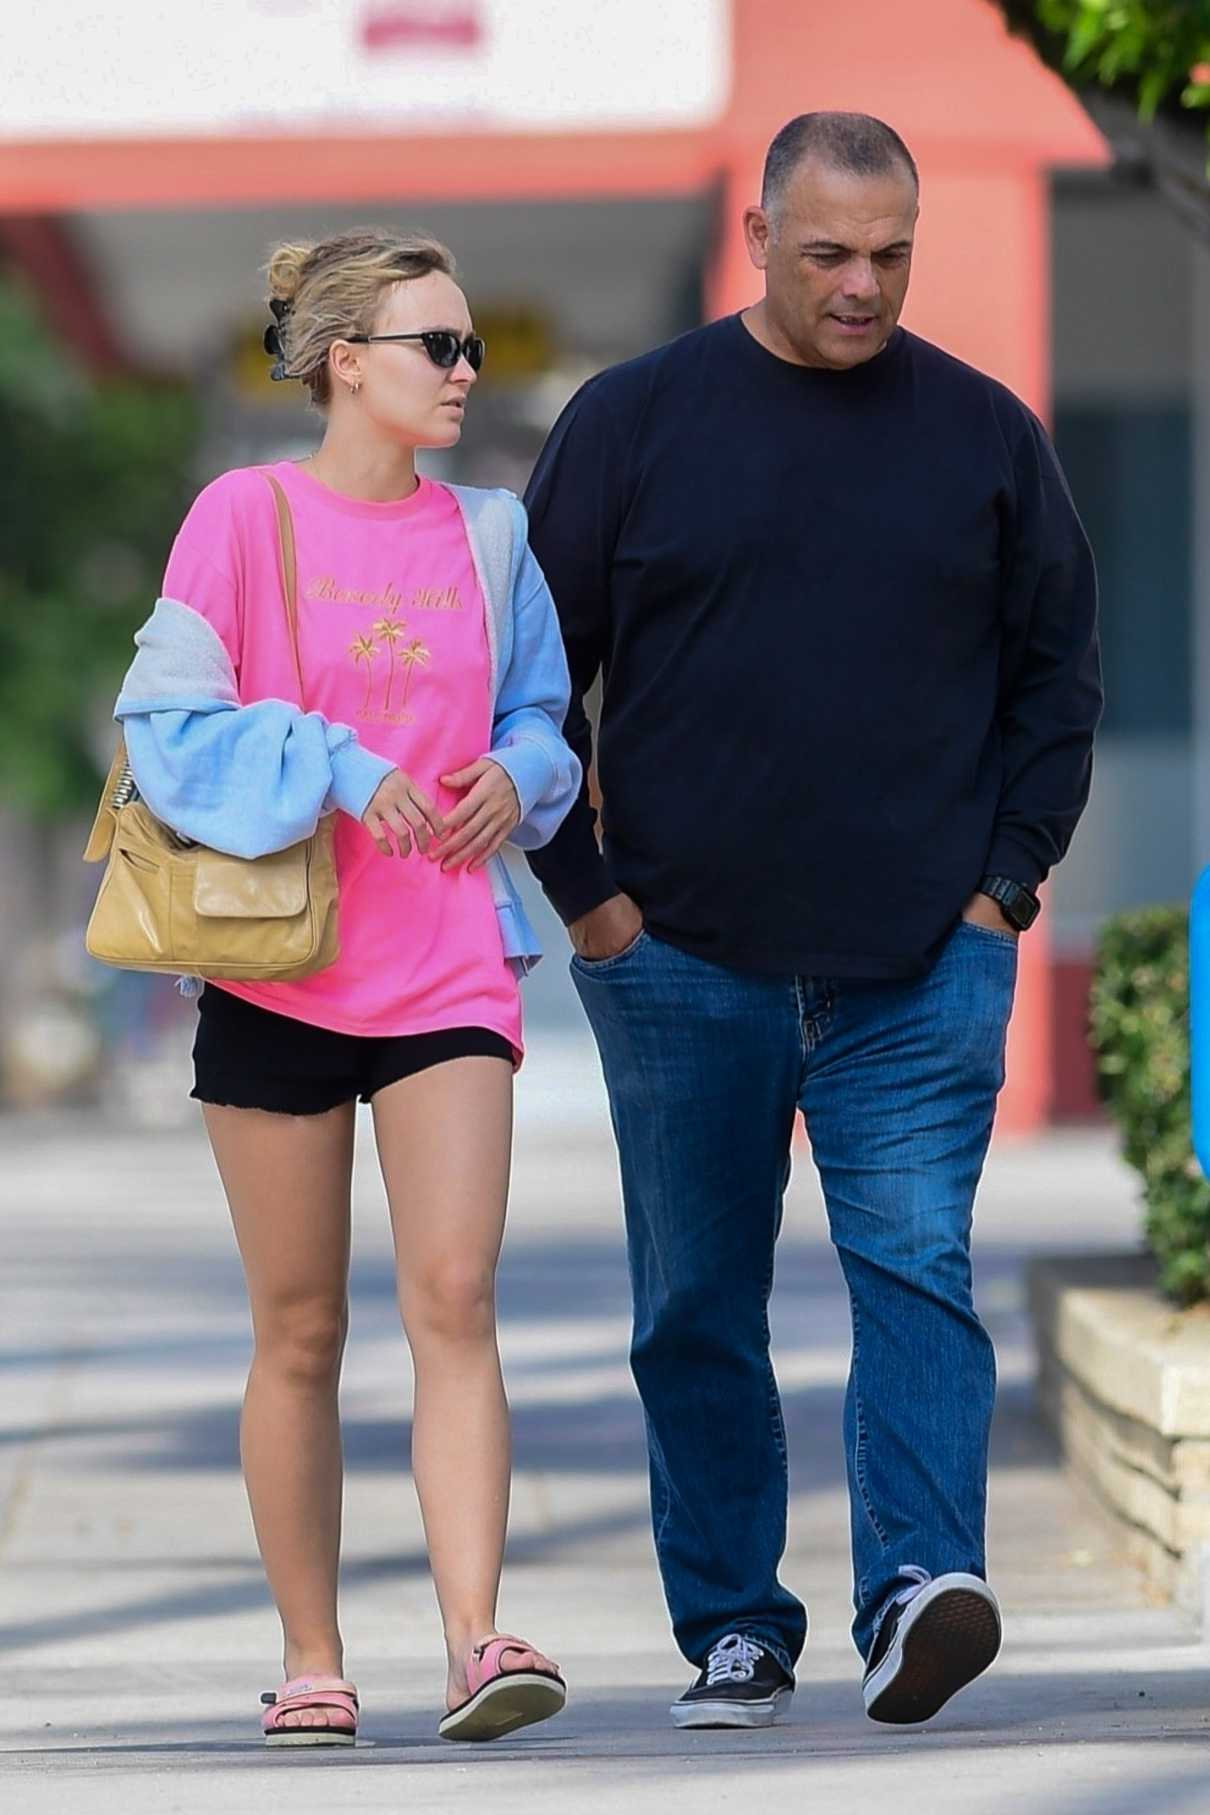 Lily-Rose Depp in a Pink Shirt